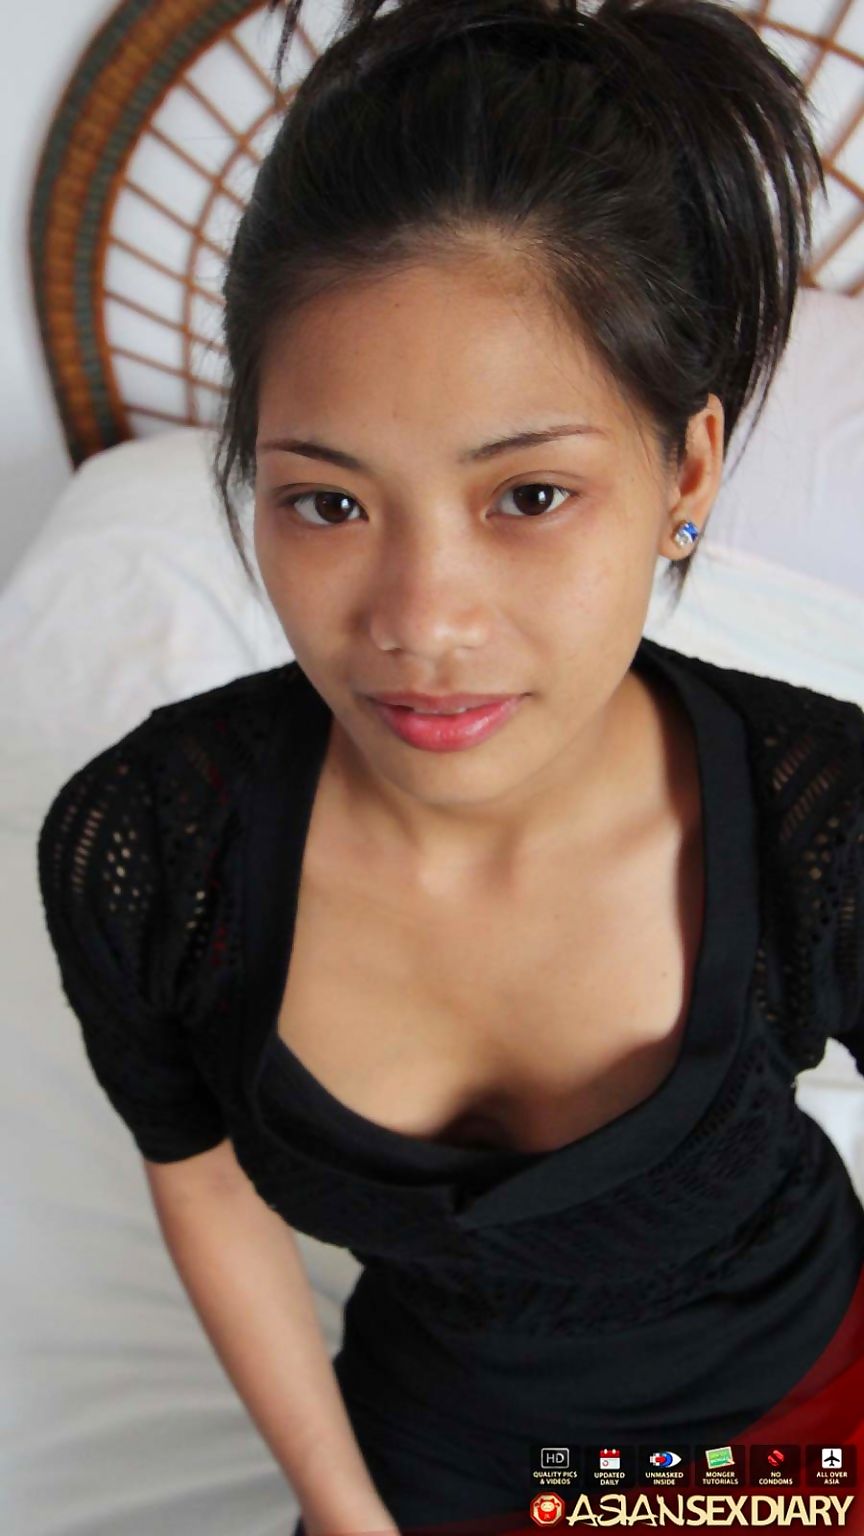 Skinny filipina milf shows off her bits - part 1660 page 1